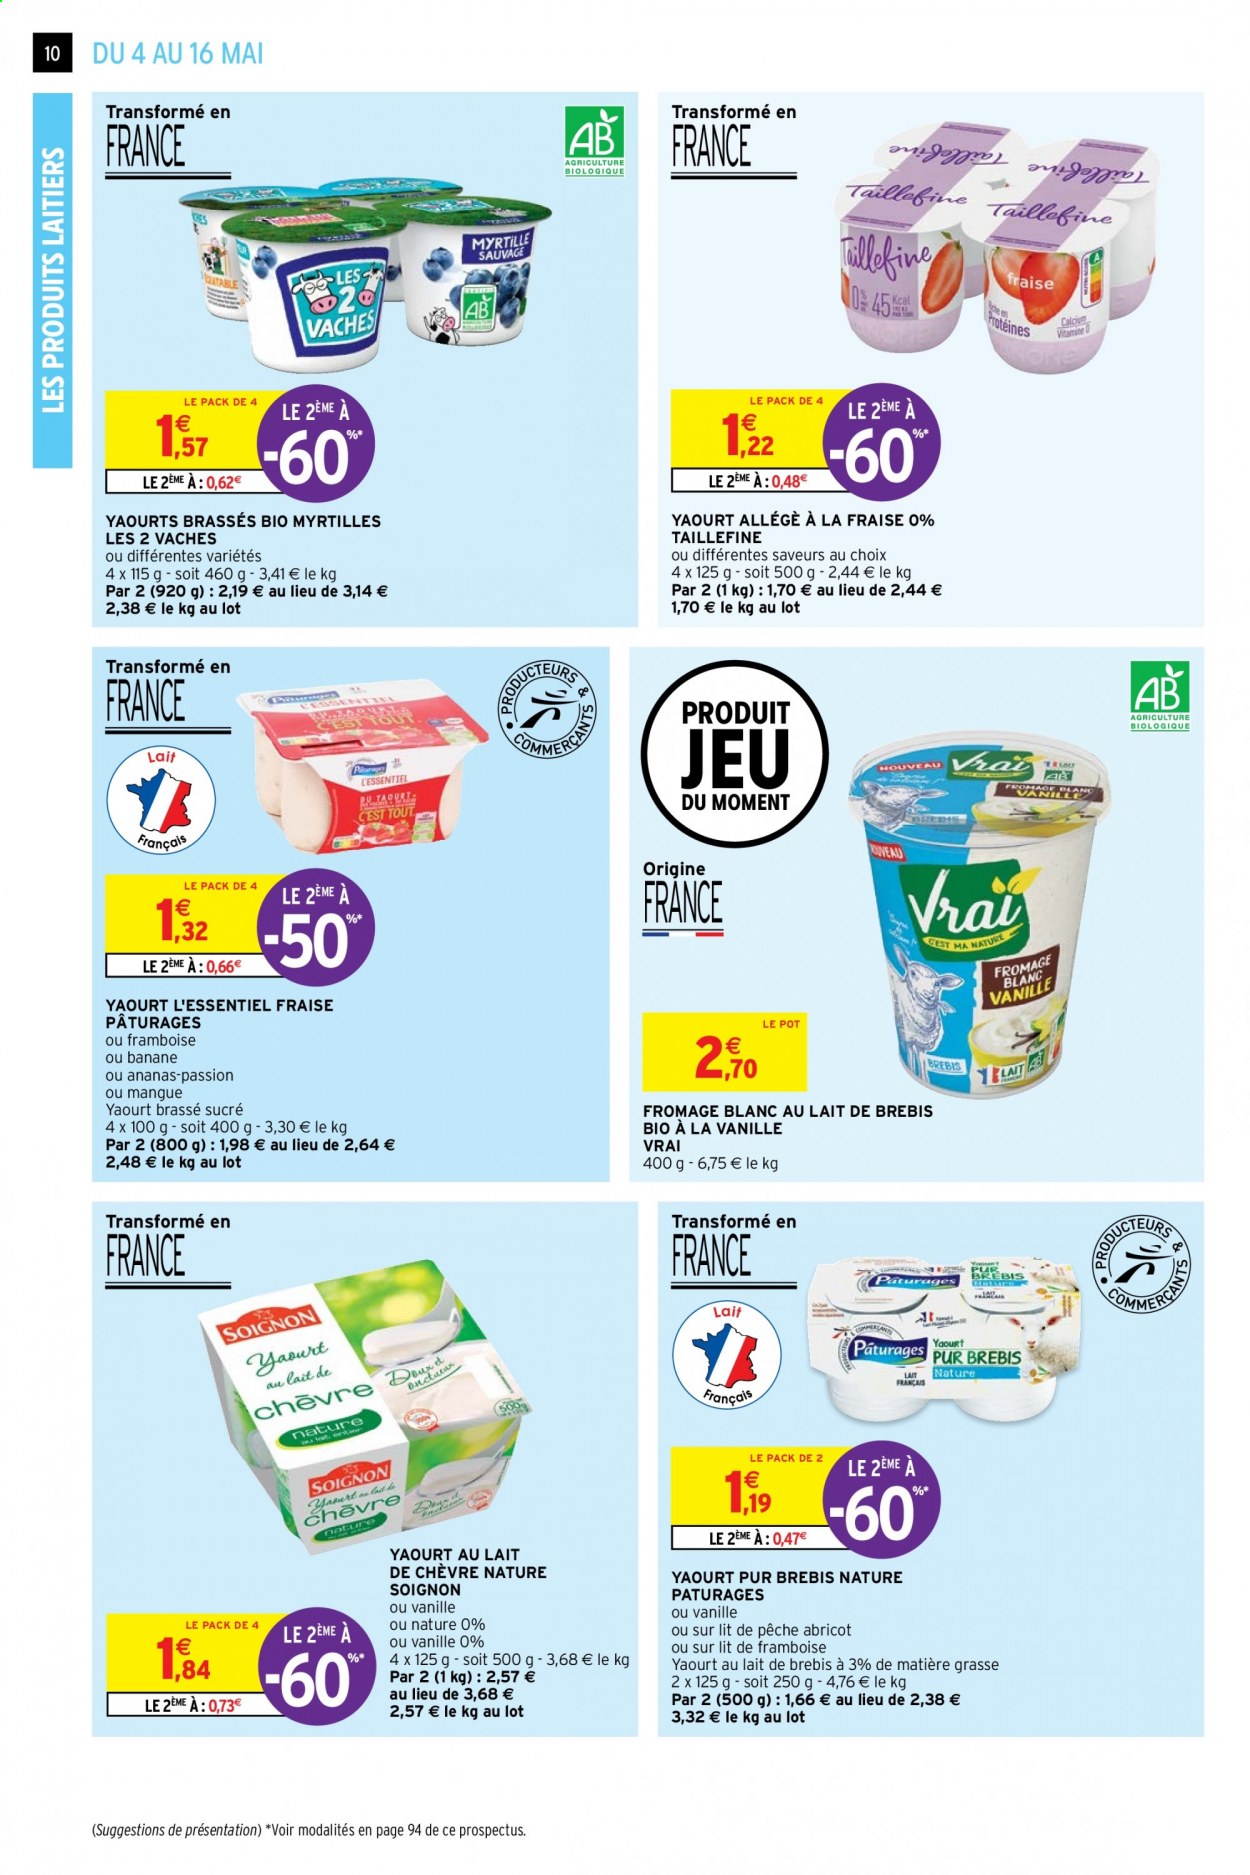 thumbnail - Catalogue Intermarché Hyper - 04/05/2021 - 16/05/2021 - Produits soldés - bananes, fromage, fromage blanc, yaourt. Page 10.